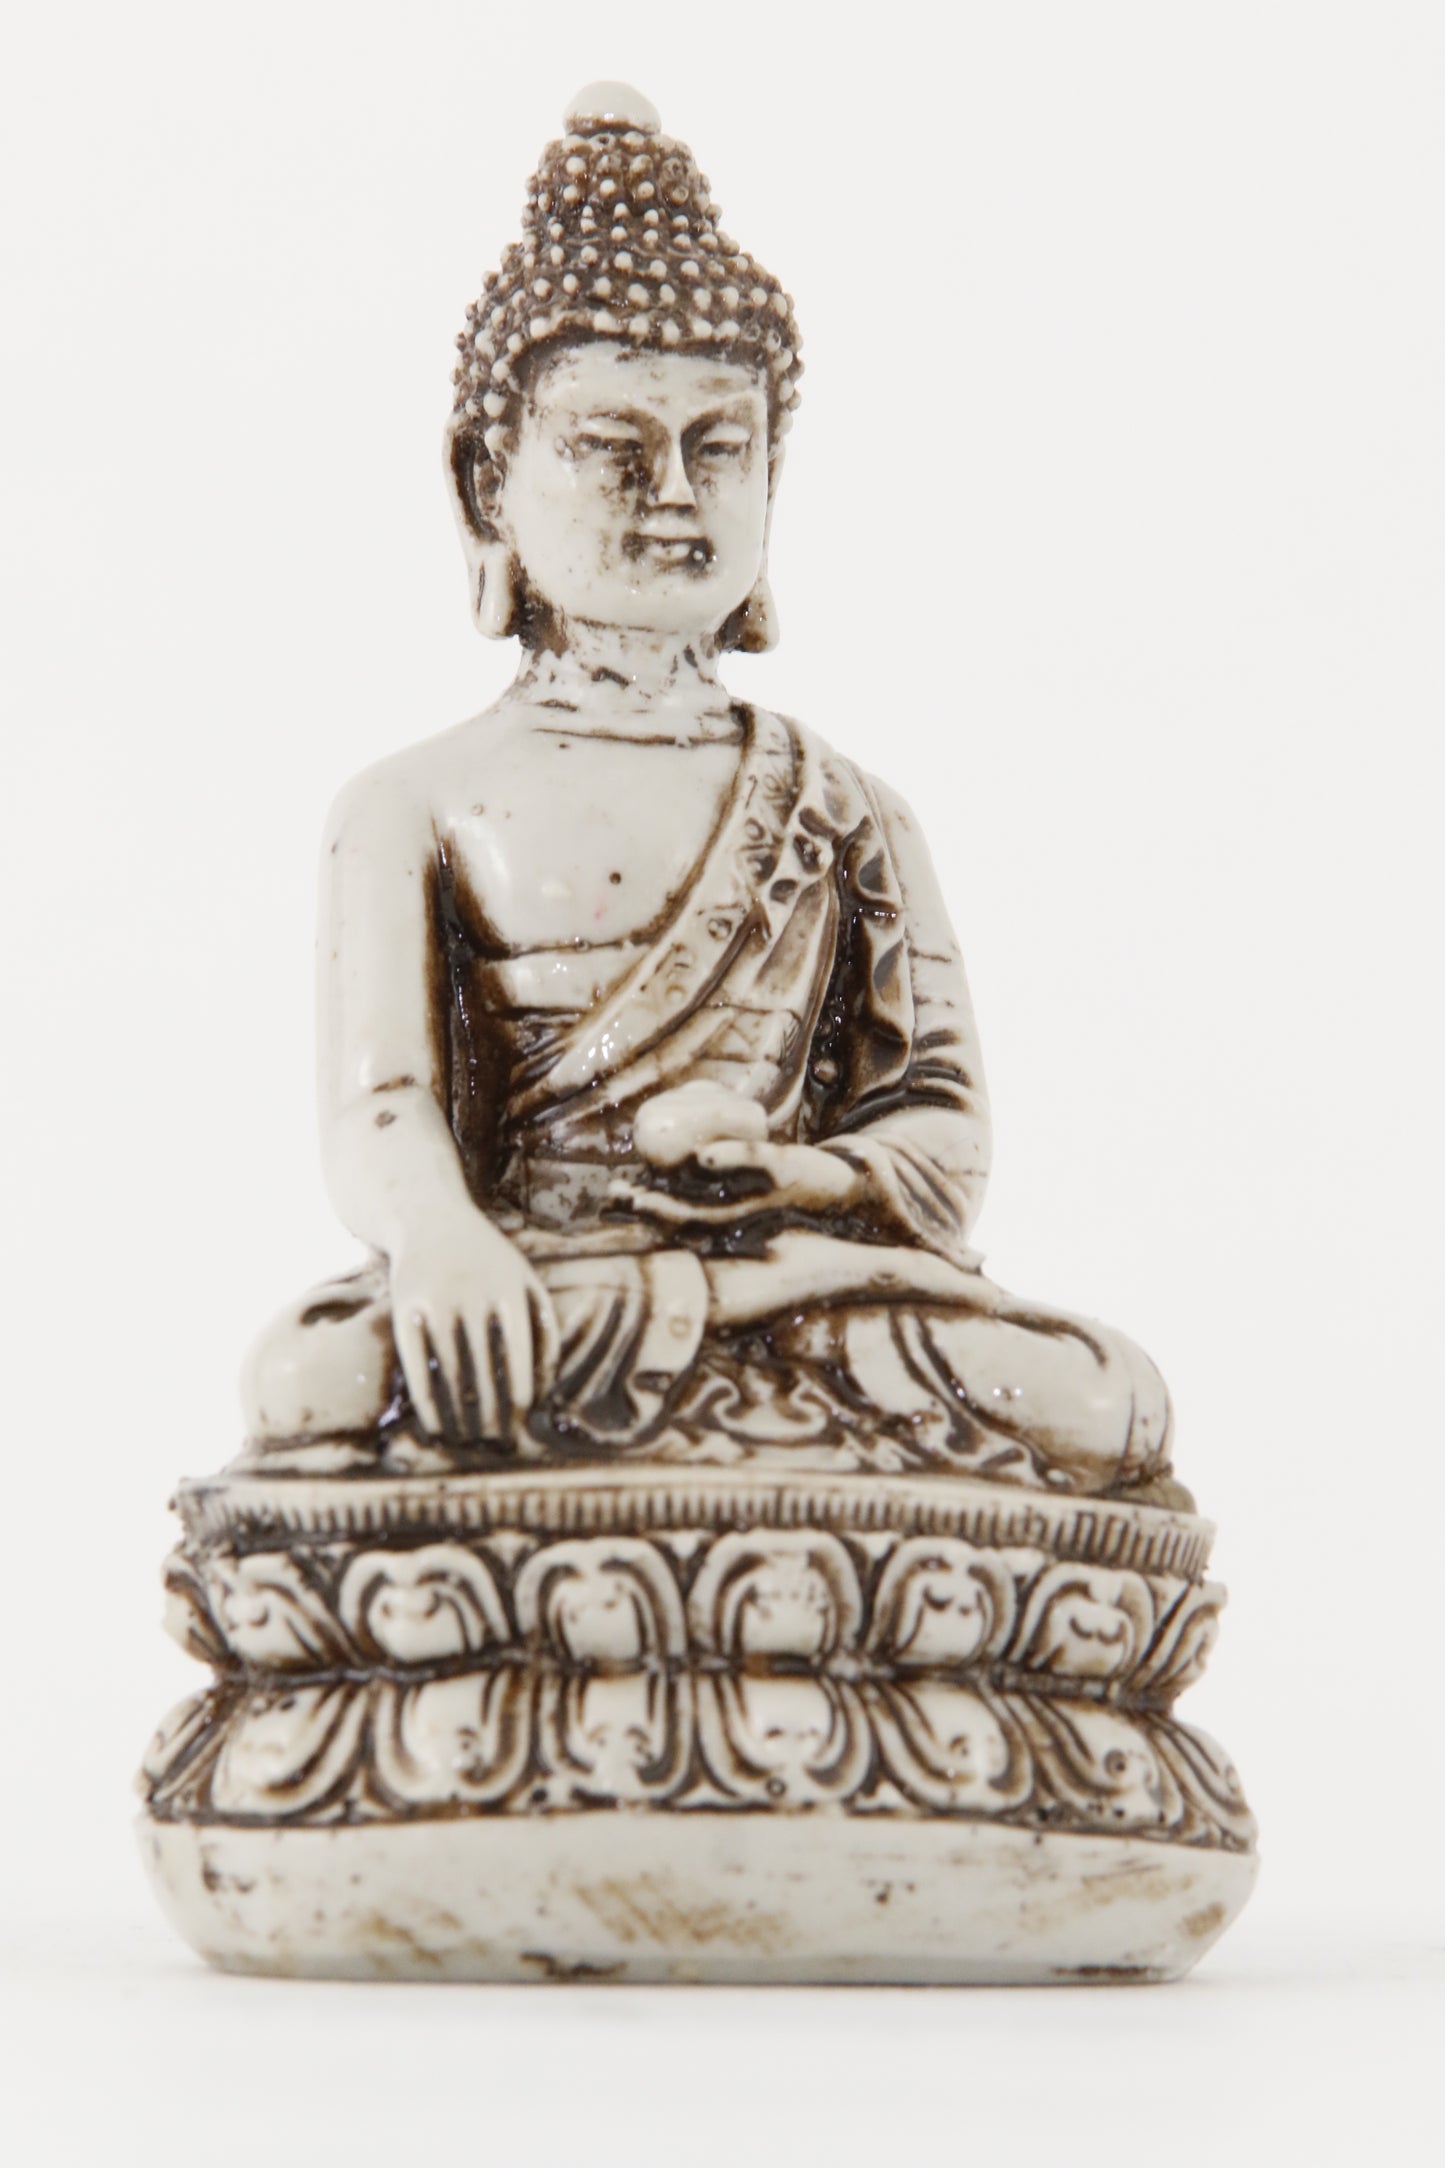 EARTH TOUCHING BUDDHA STATUE OFF-WHITE SMALL SIZE SIDE VIEW